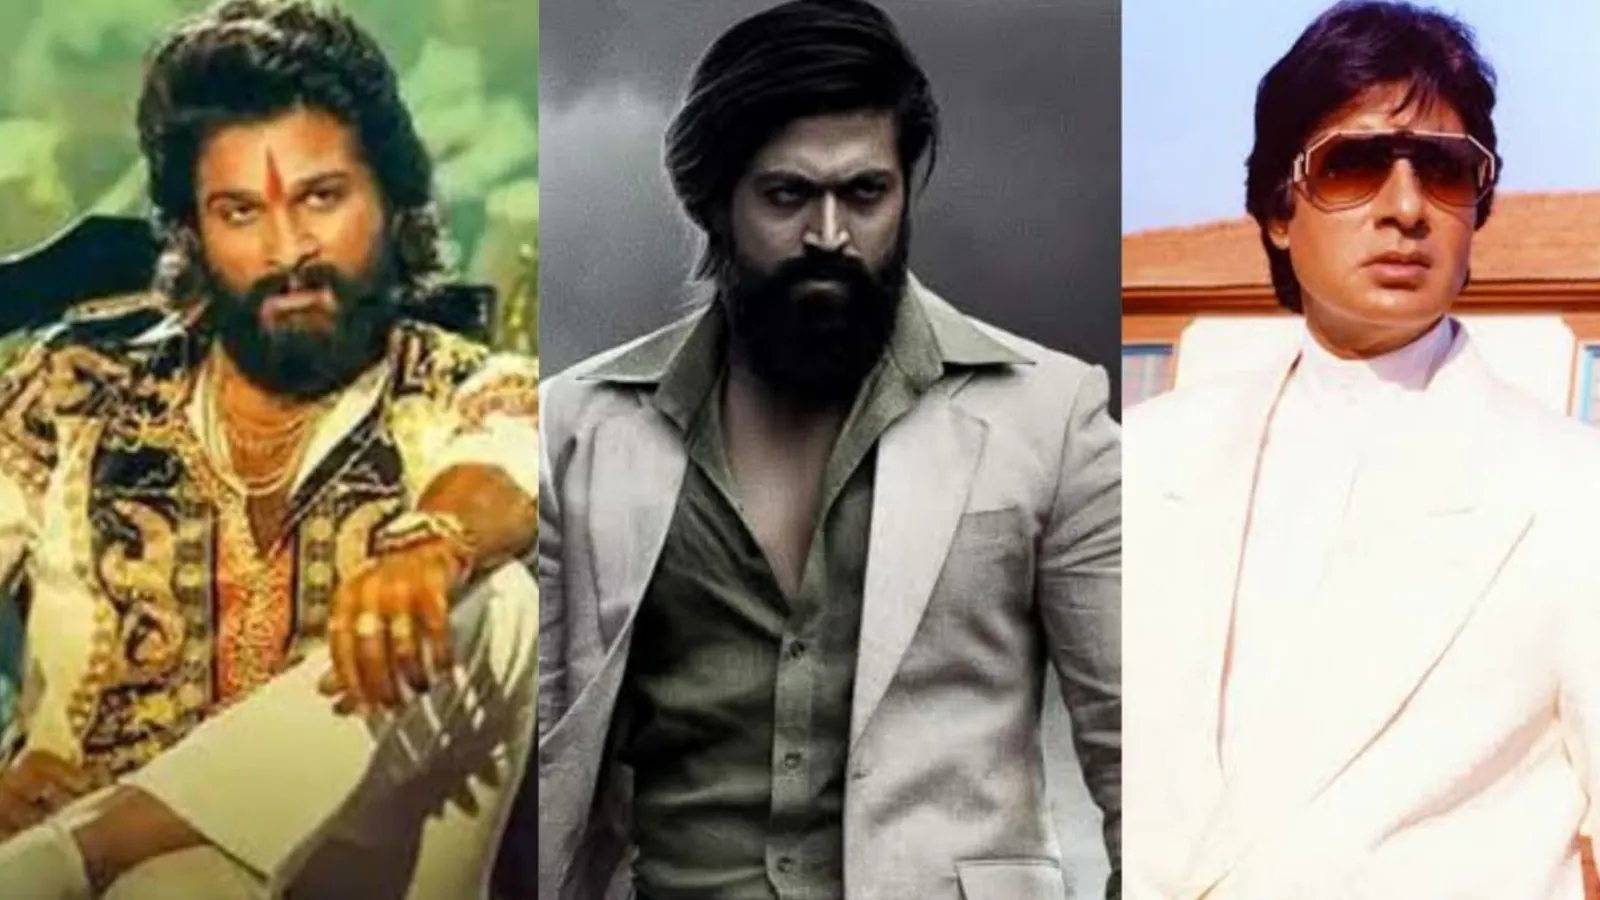 Decoding the success of KGF Chapter 2 and Pushpa The Rise: How they brought back Bollywood’s own angry young man formula